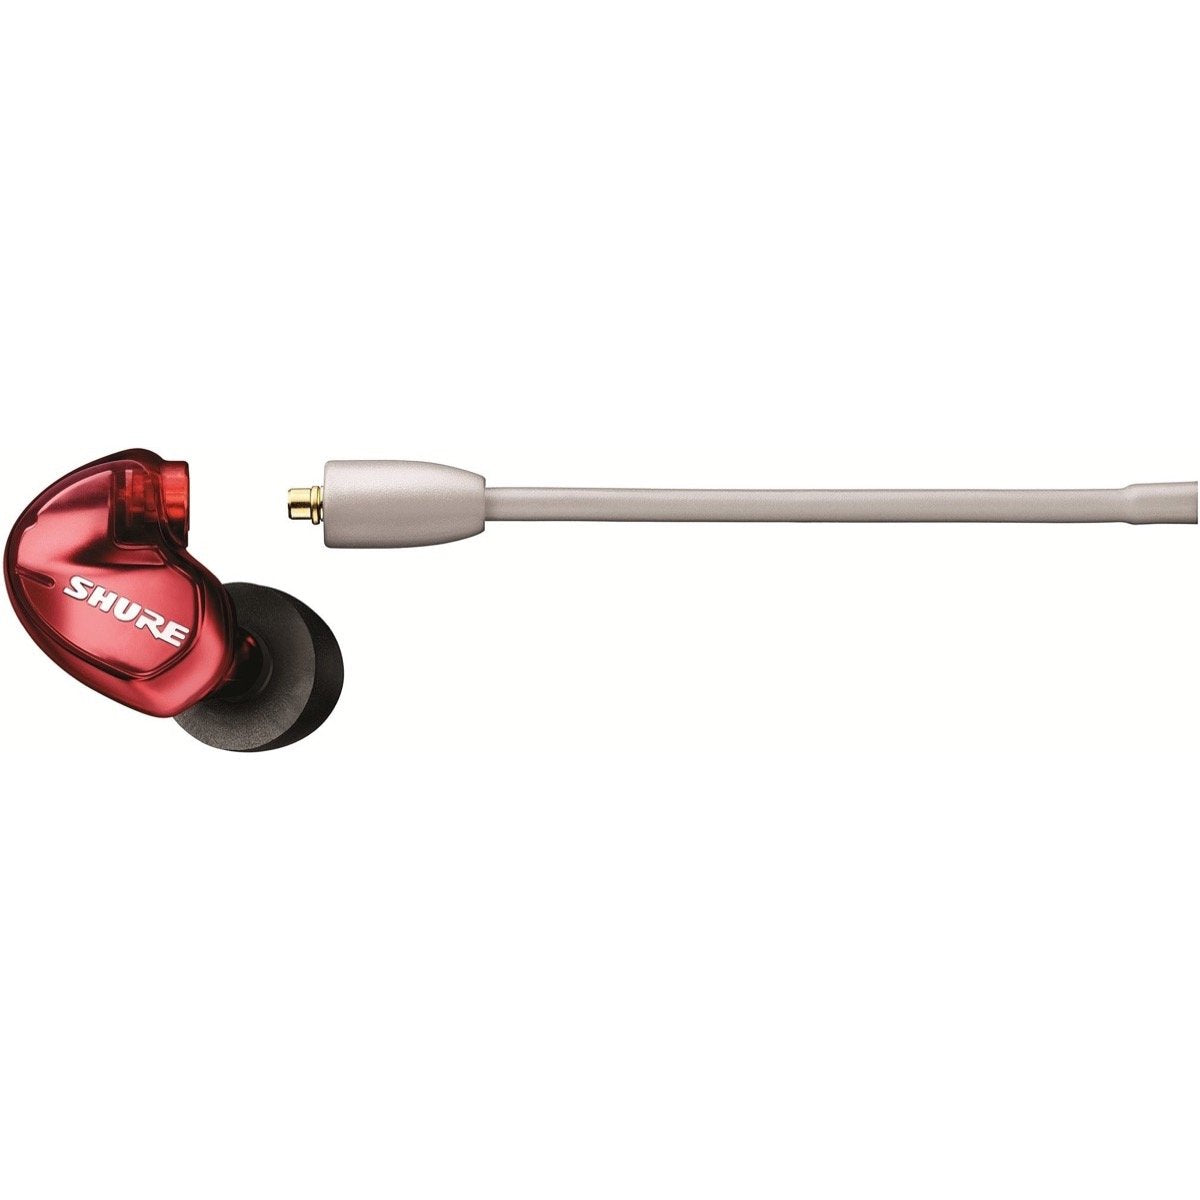 Shure SE535 Sound Isolating Earphones, Limited Edition Red – Same